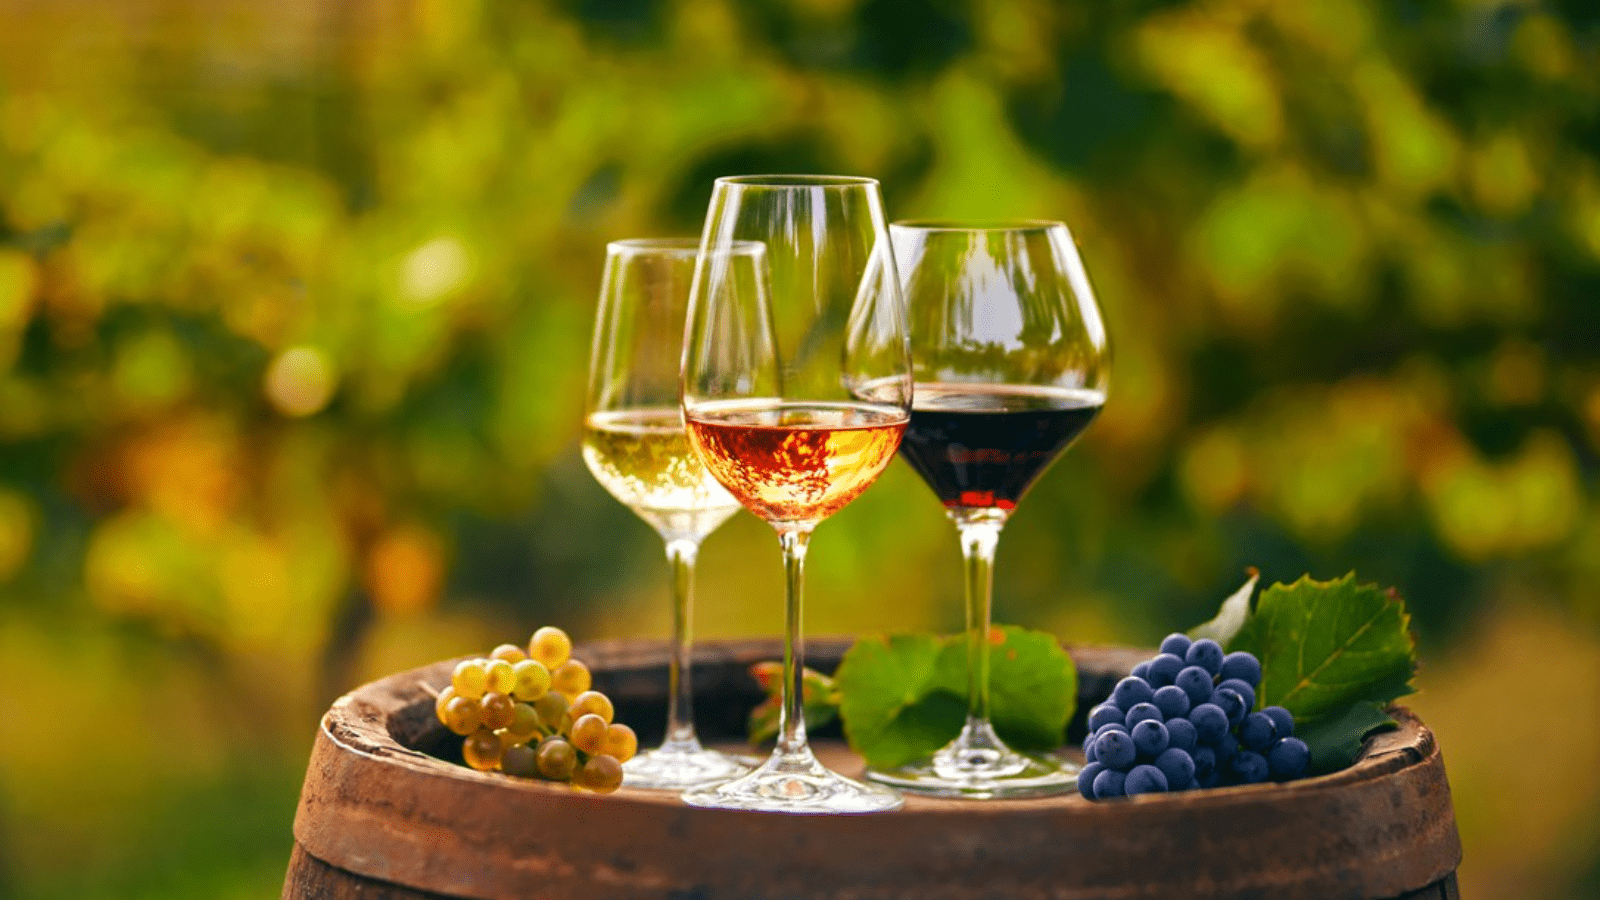 UK introduces wine sector reforms to promote productivity, enhance innovation